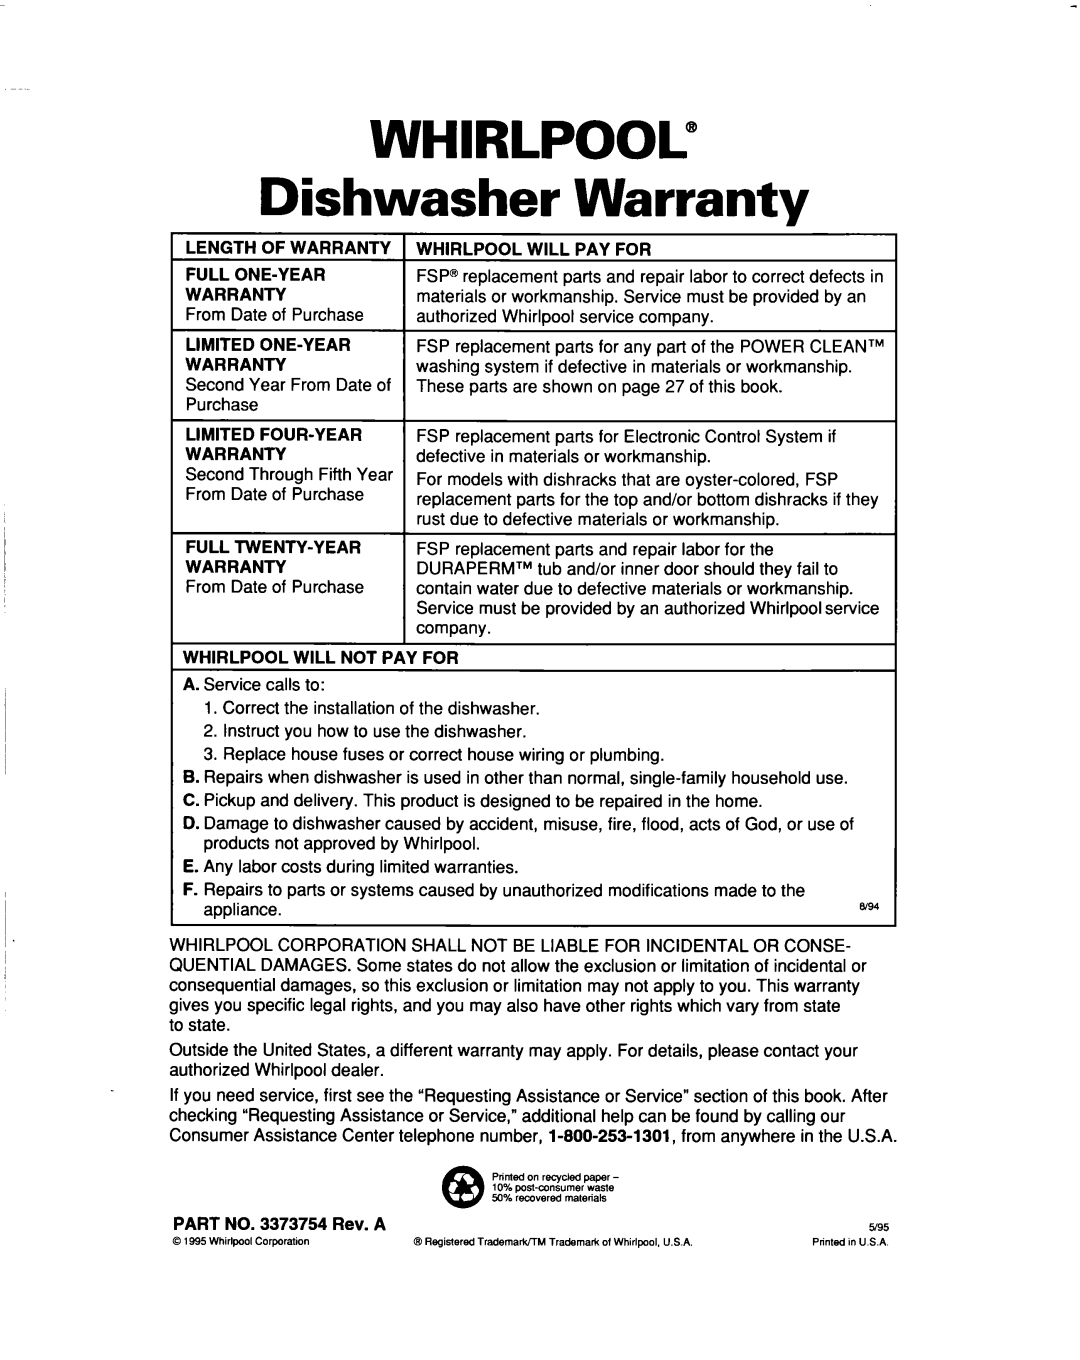 Whirlpool 960 Series WHIRLPOOL@ Dishwasher Warranty, Length Of Warranty Full One-Year Warranty, Whirlpool Will Pay For 